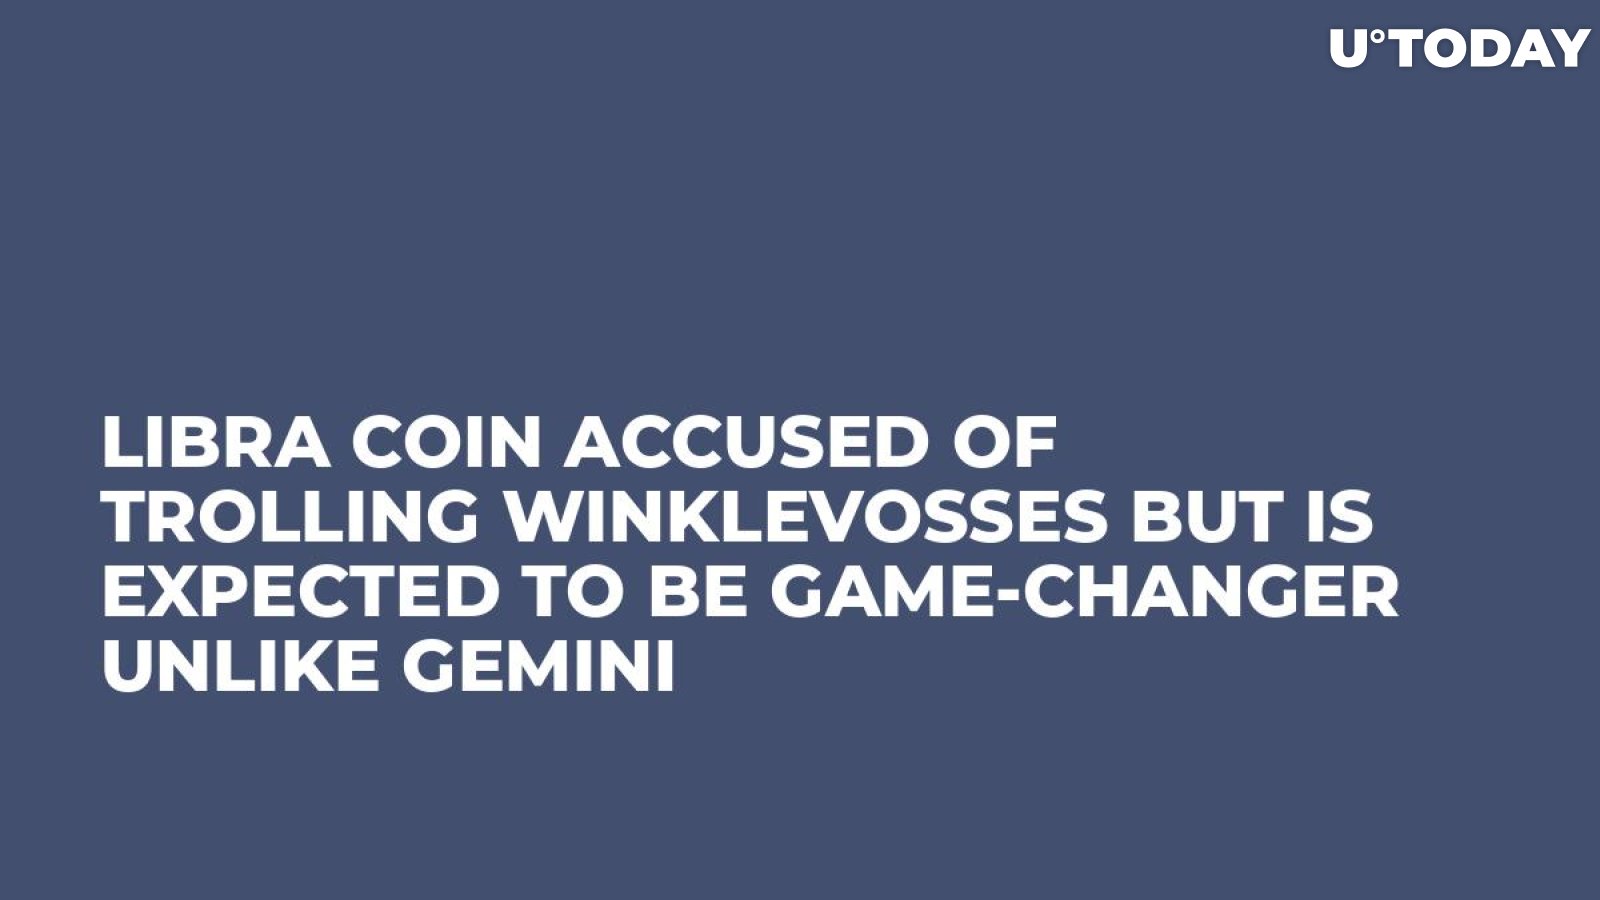 Libra Coin Accused of Trolling Winklevosses But Is Expected to Be Game-Changer Unlike Gemini